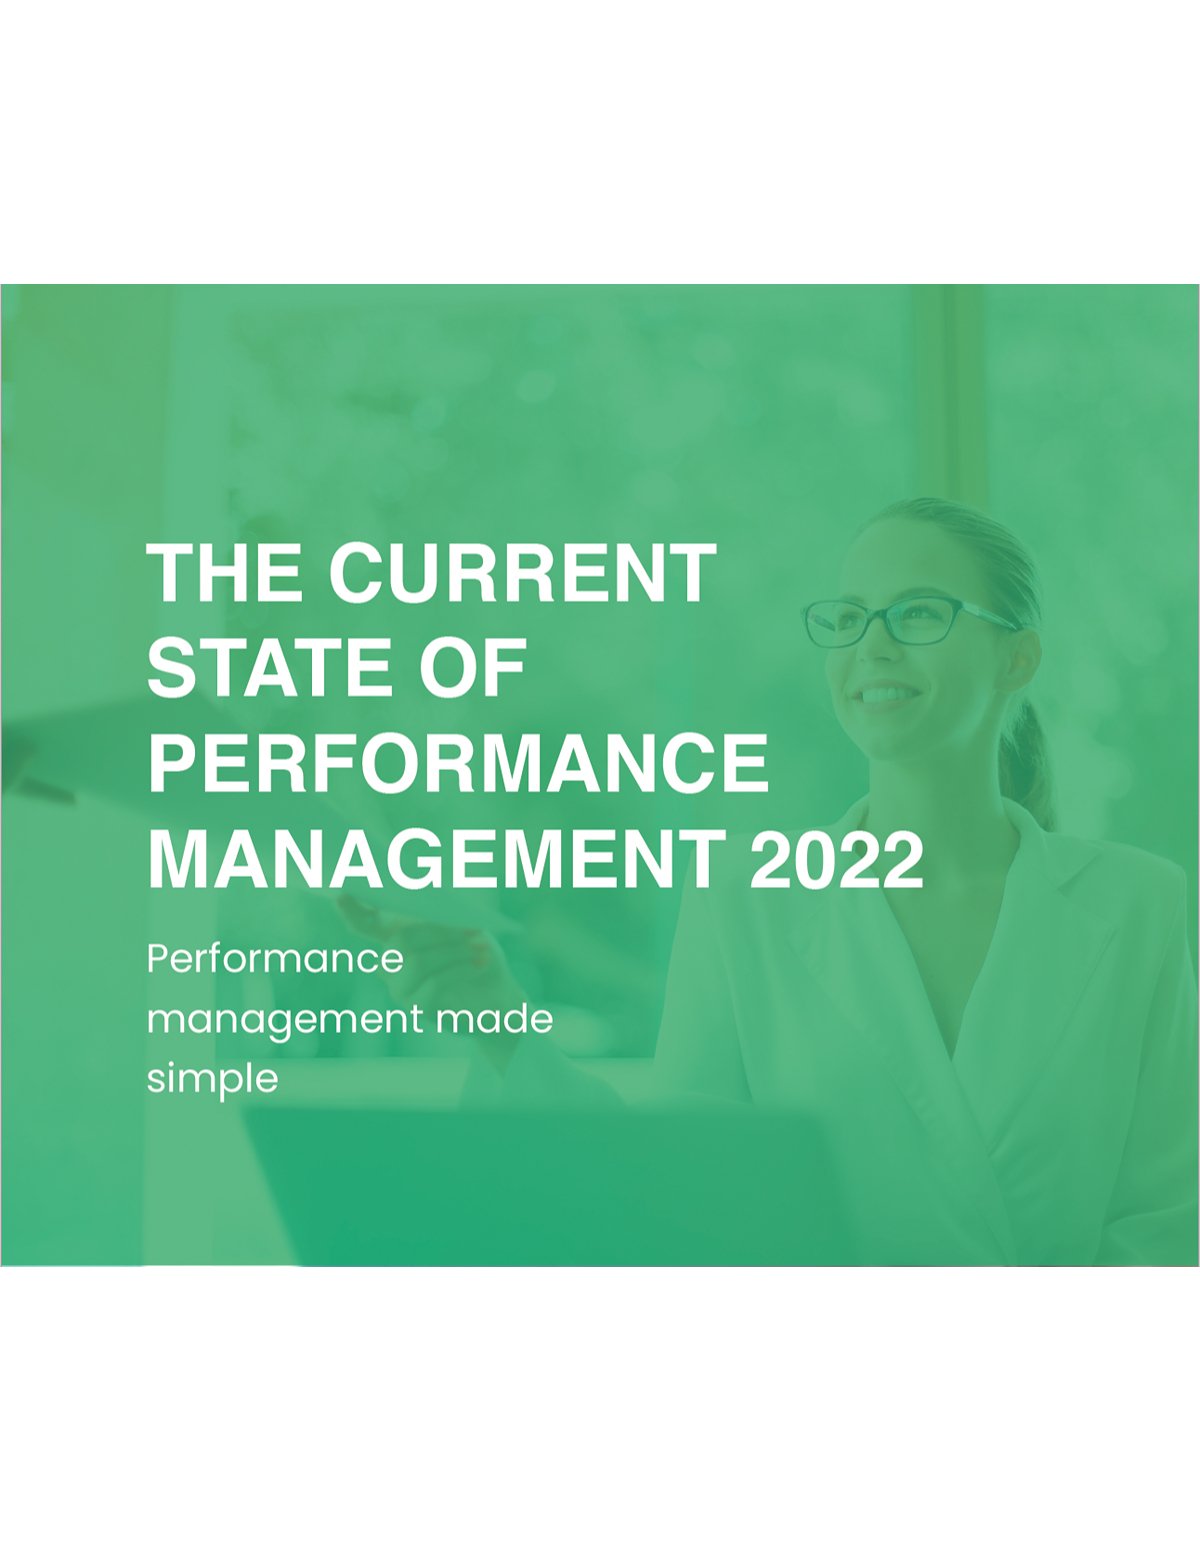 The Current State of Performance Management 2022